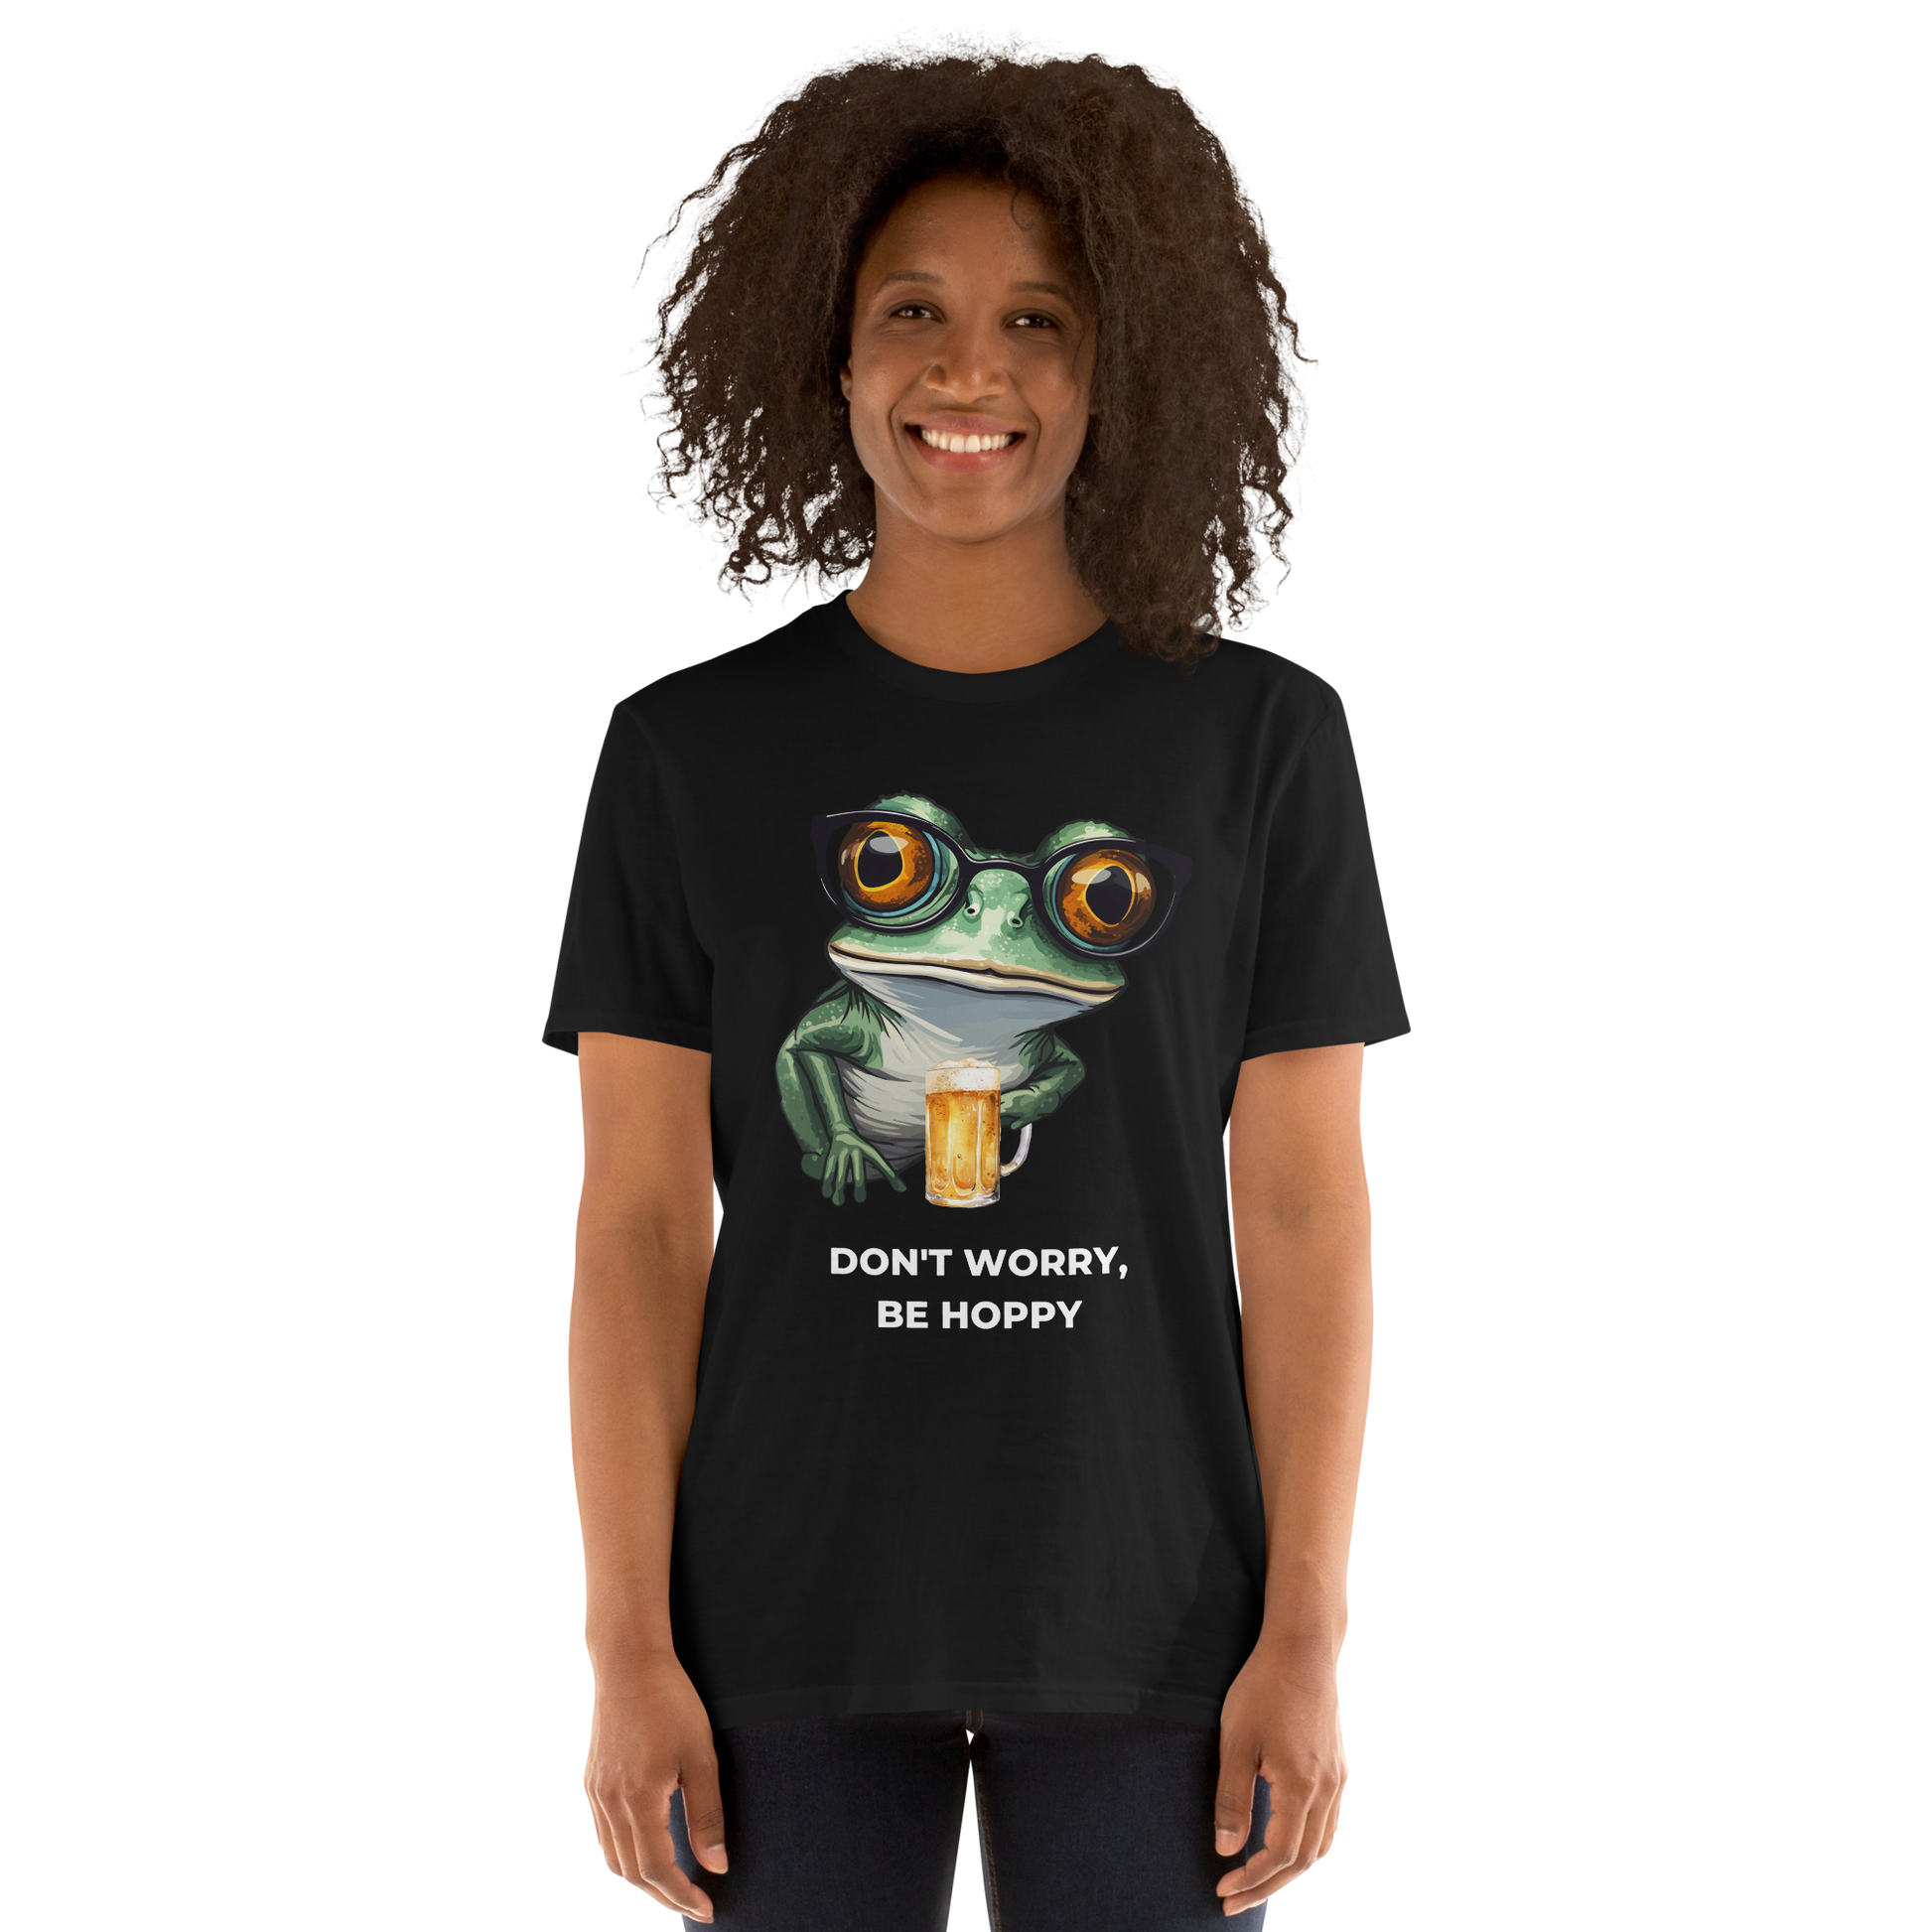 Smiling woman wearing a Black Frog T-Shirt featuring a ribbitting Don't Worry, Be Hoppy graphic on the chest - Funny Graphic Frog T-Shirts - Boozy Fox